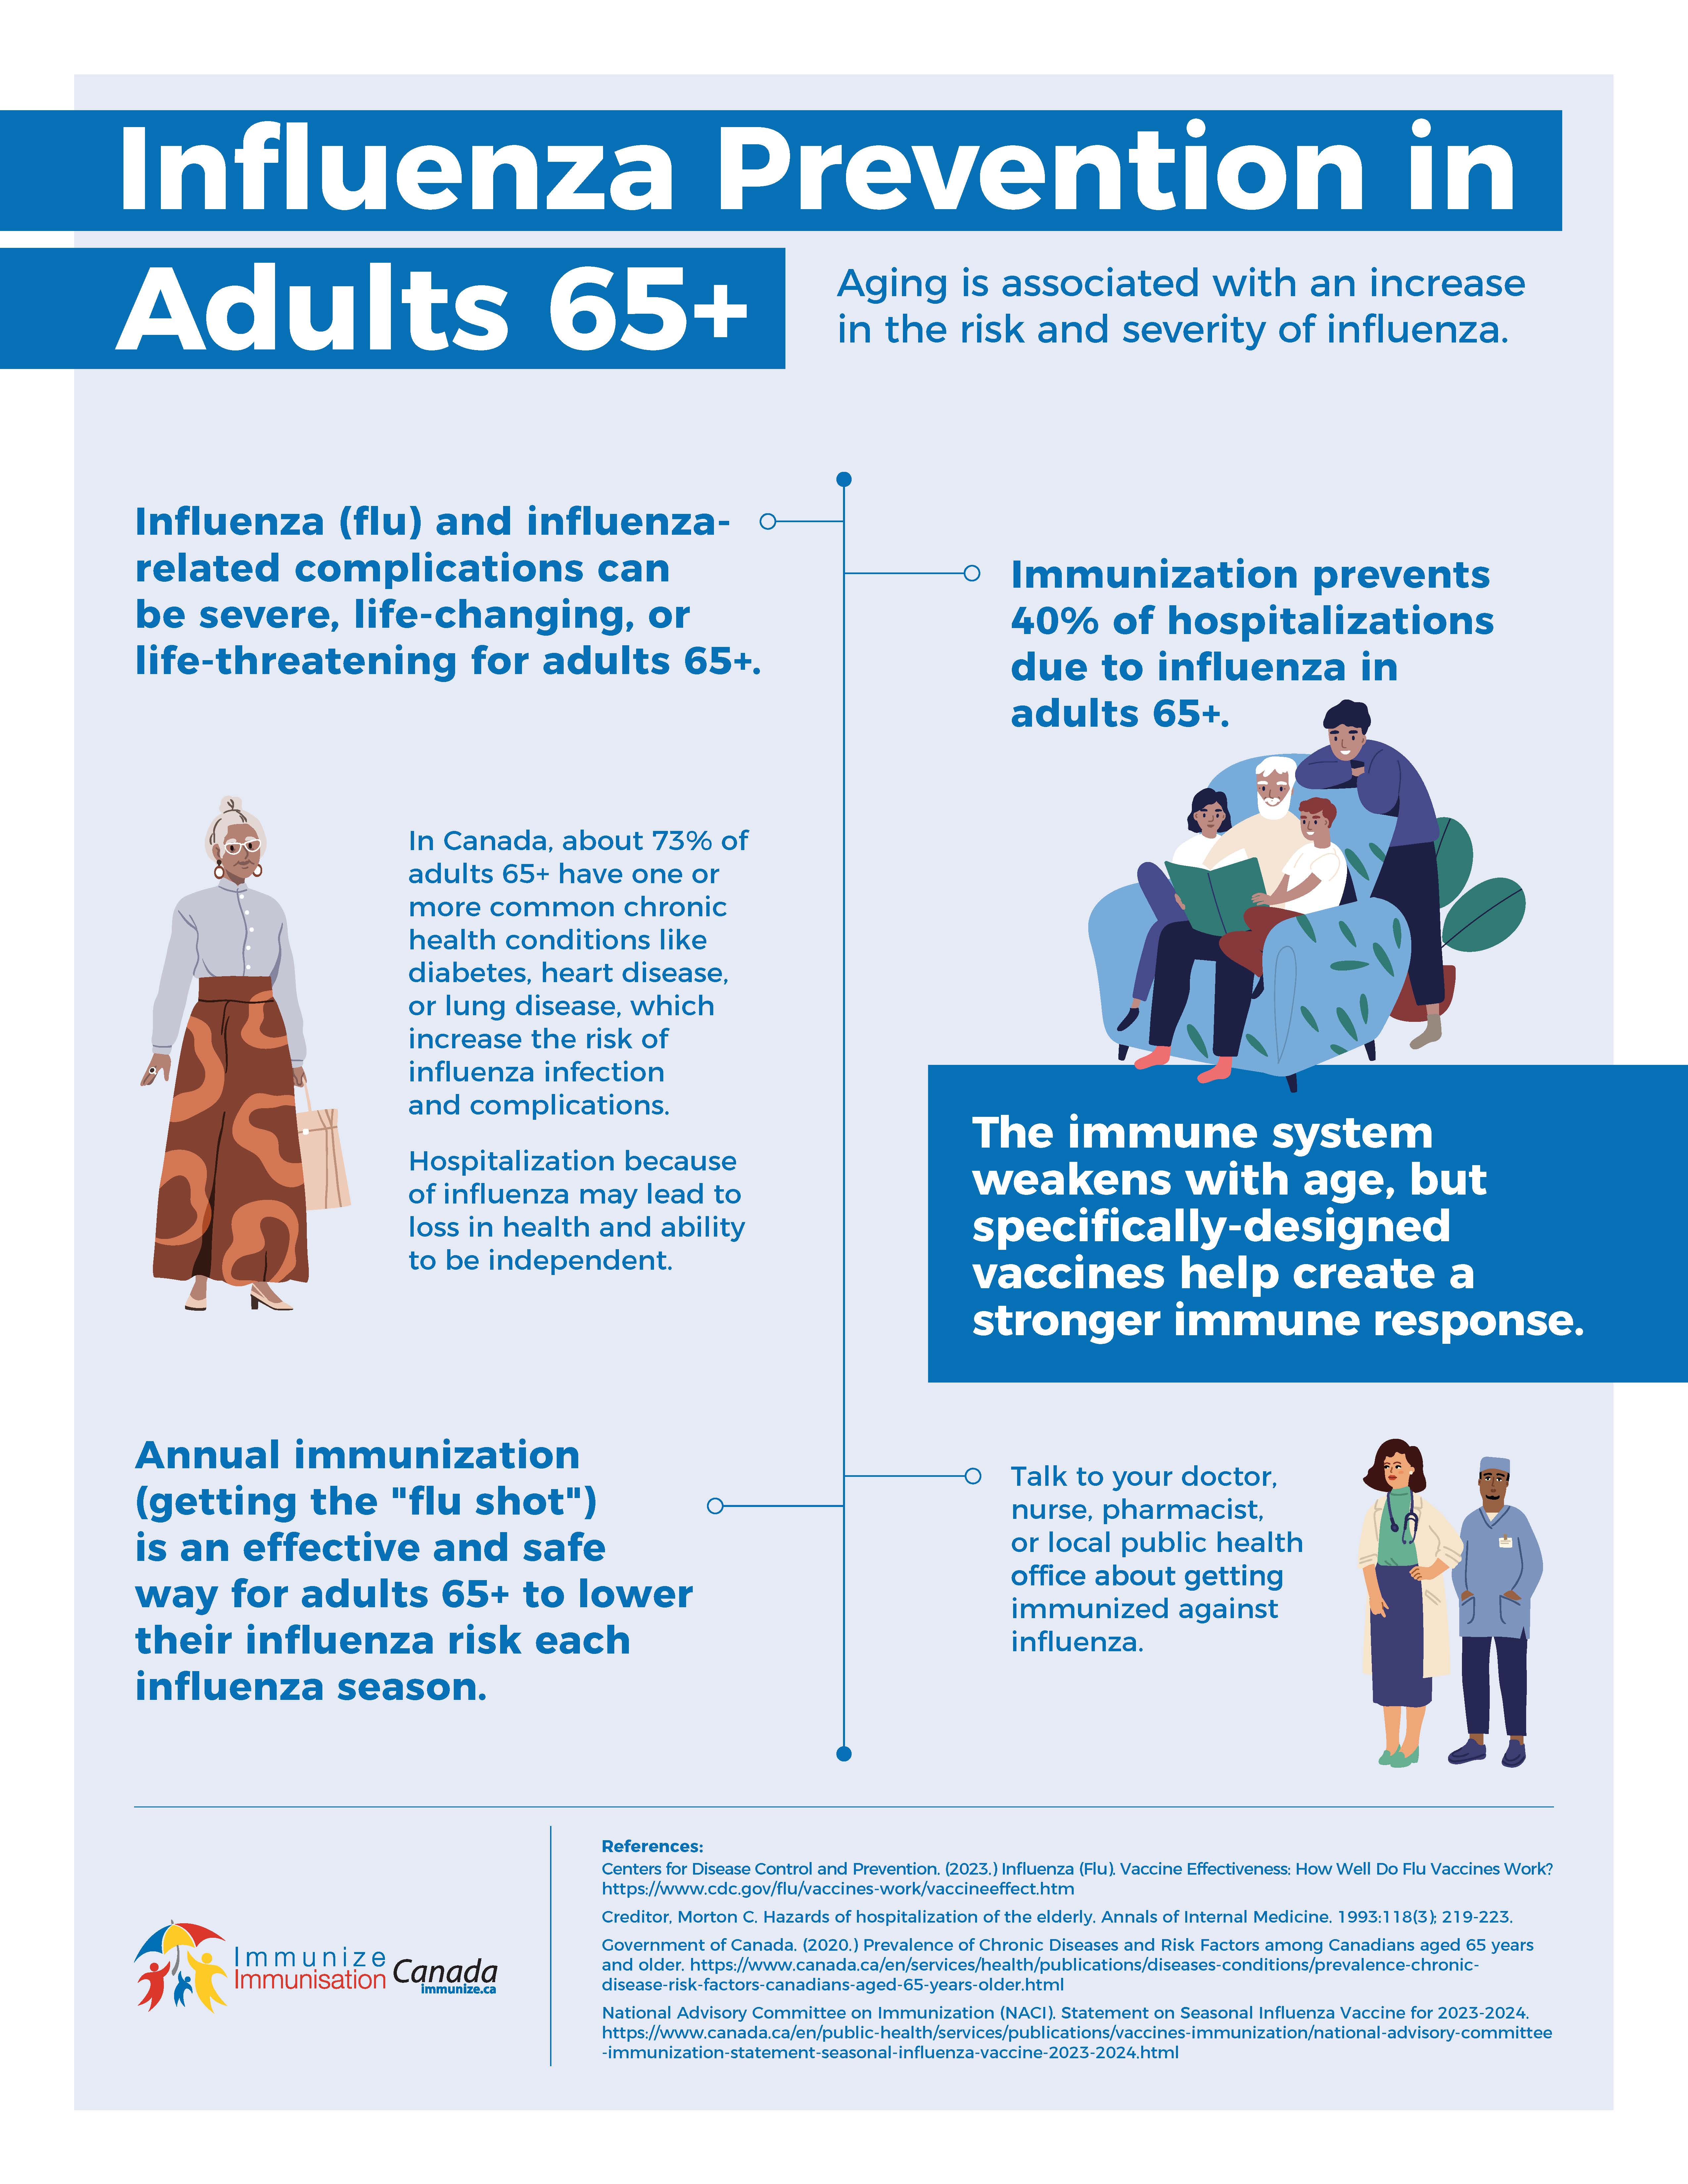 Influenza Prevention in Adults 65+